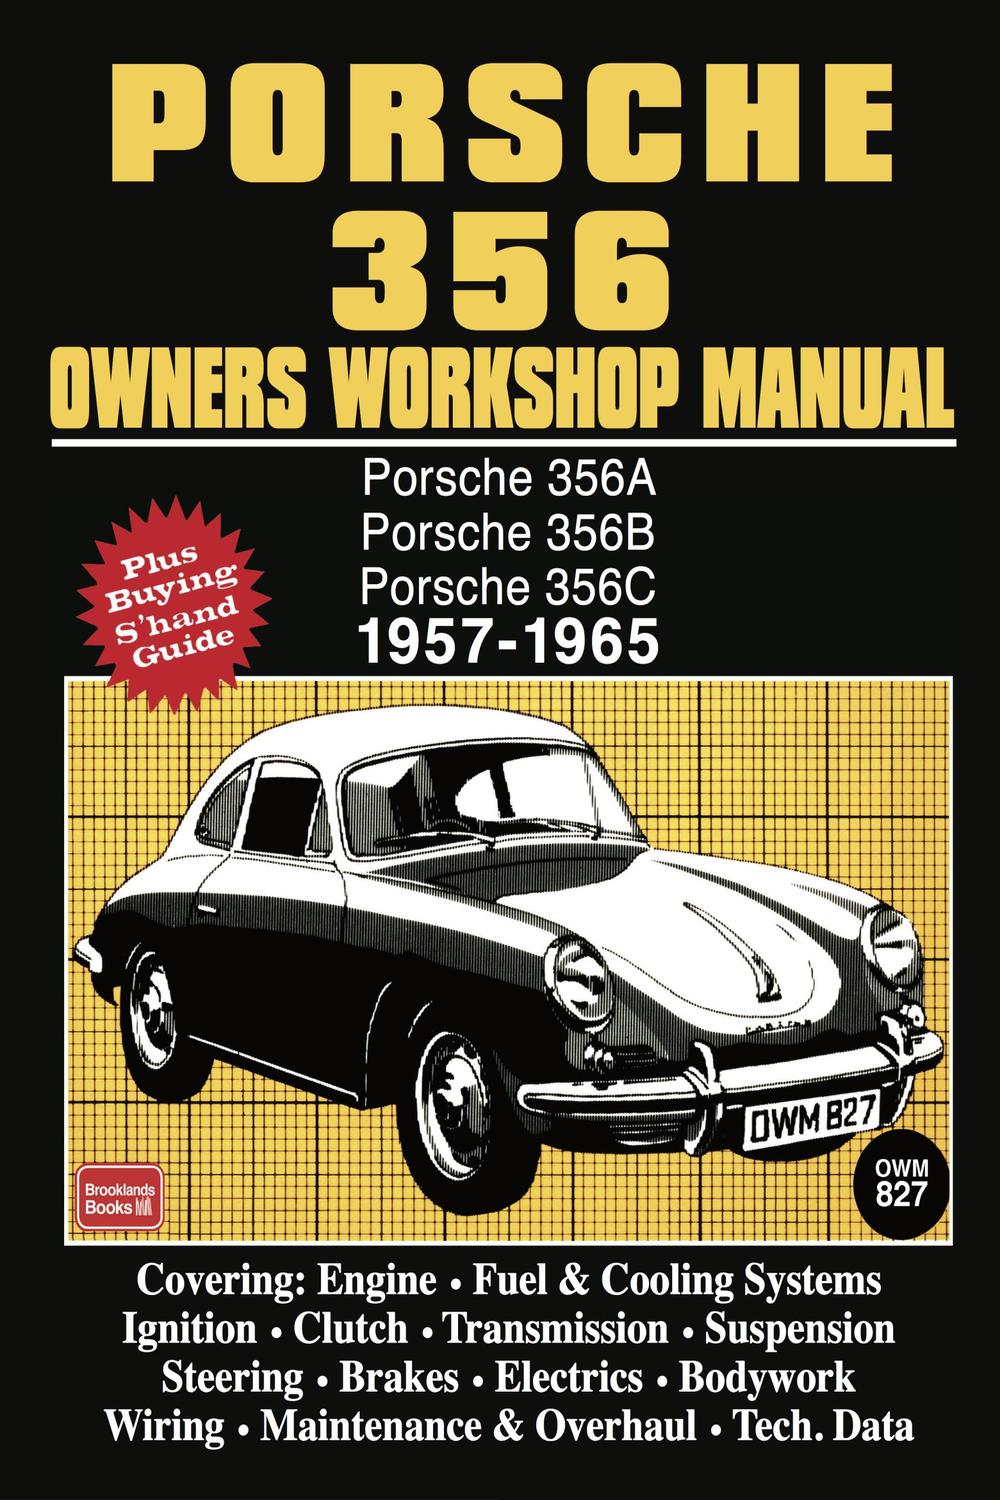 Porsche 356 Owners Workshop Manual 1957-1965 - Trade Trade,,